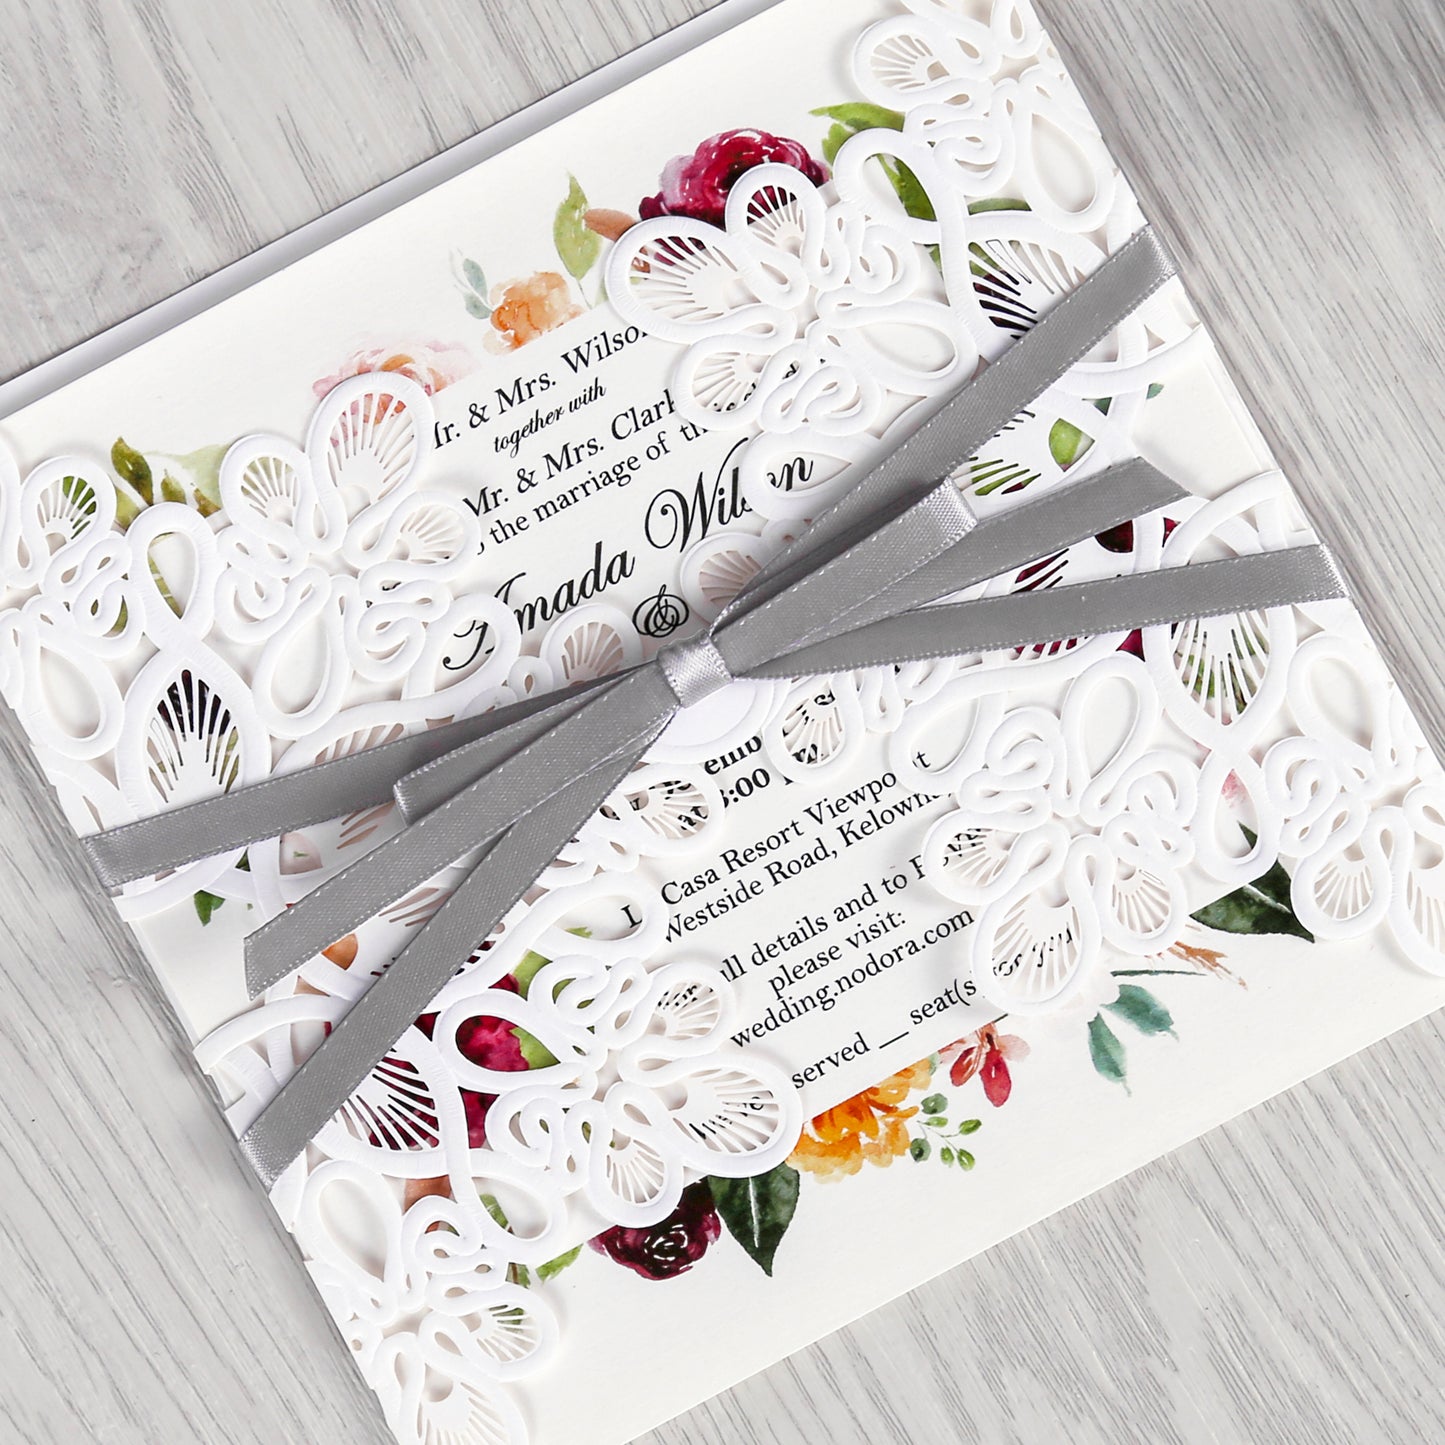 White Laser Cut with Gray Bowknot wedding invitation